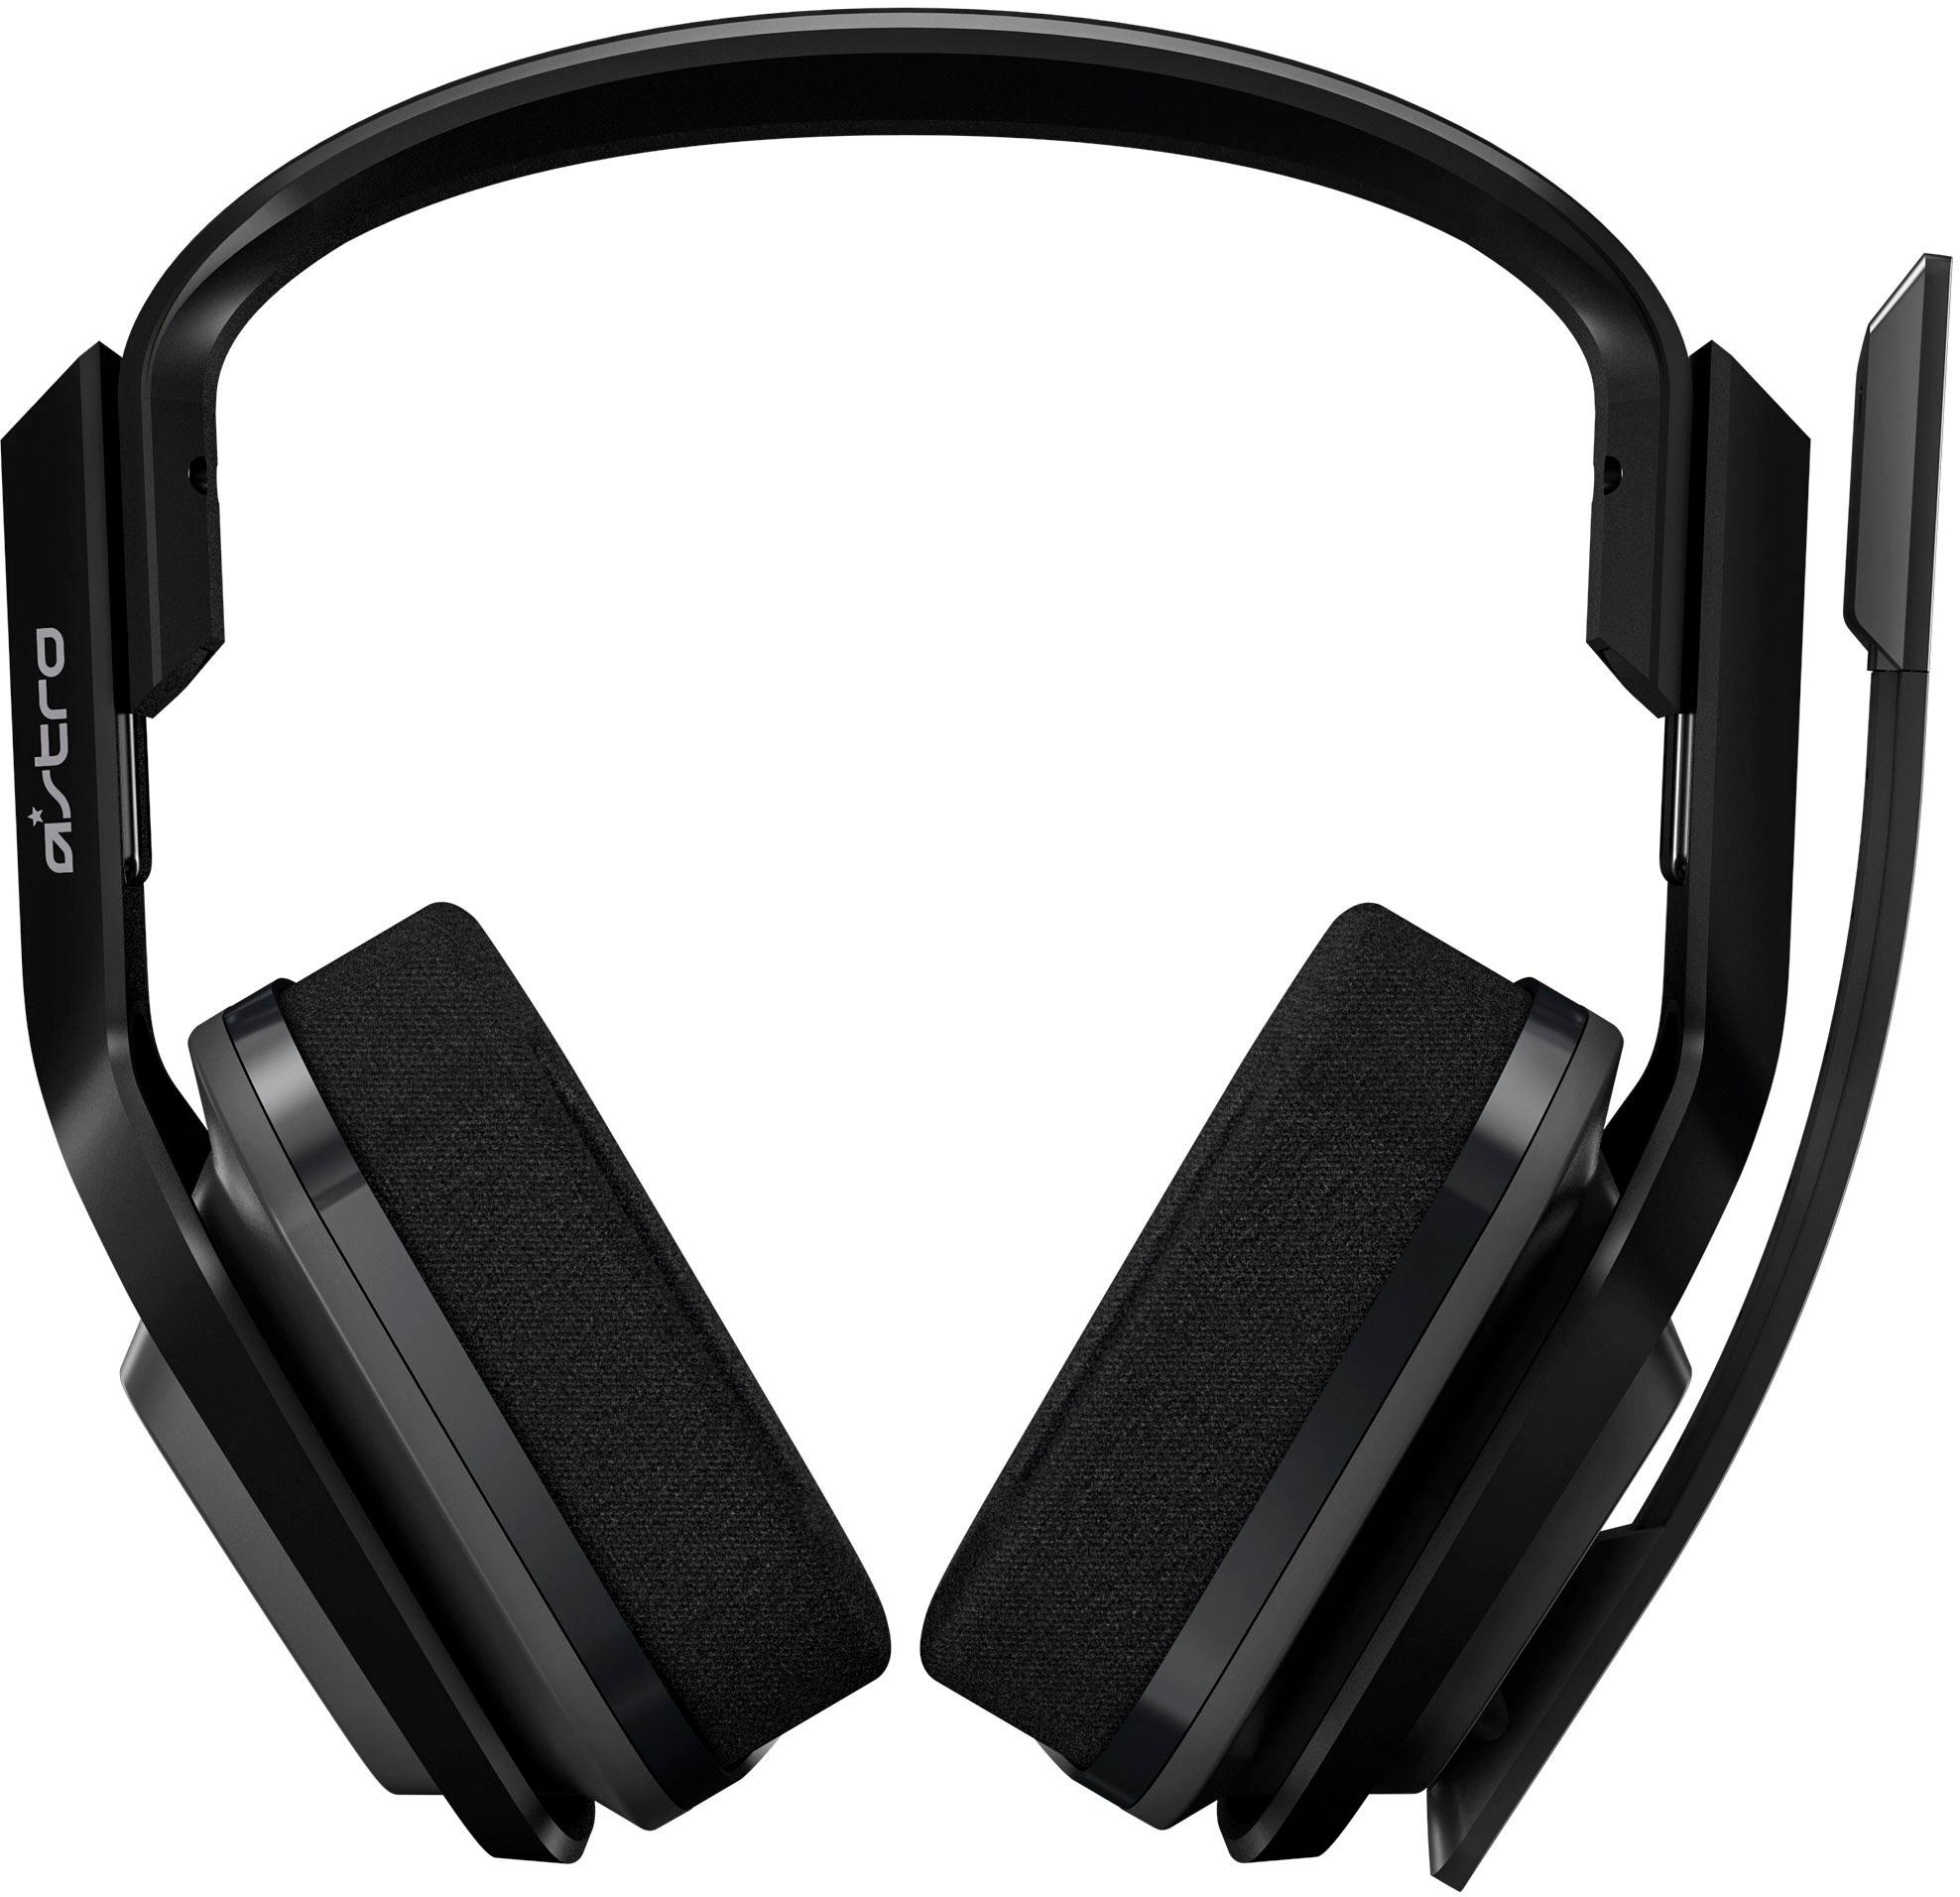 Angle View: Astro Gaming - A20 Wireless Gaming Headset for Xbox One/PC/Mac - Multi